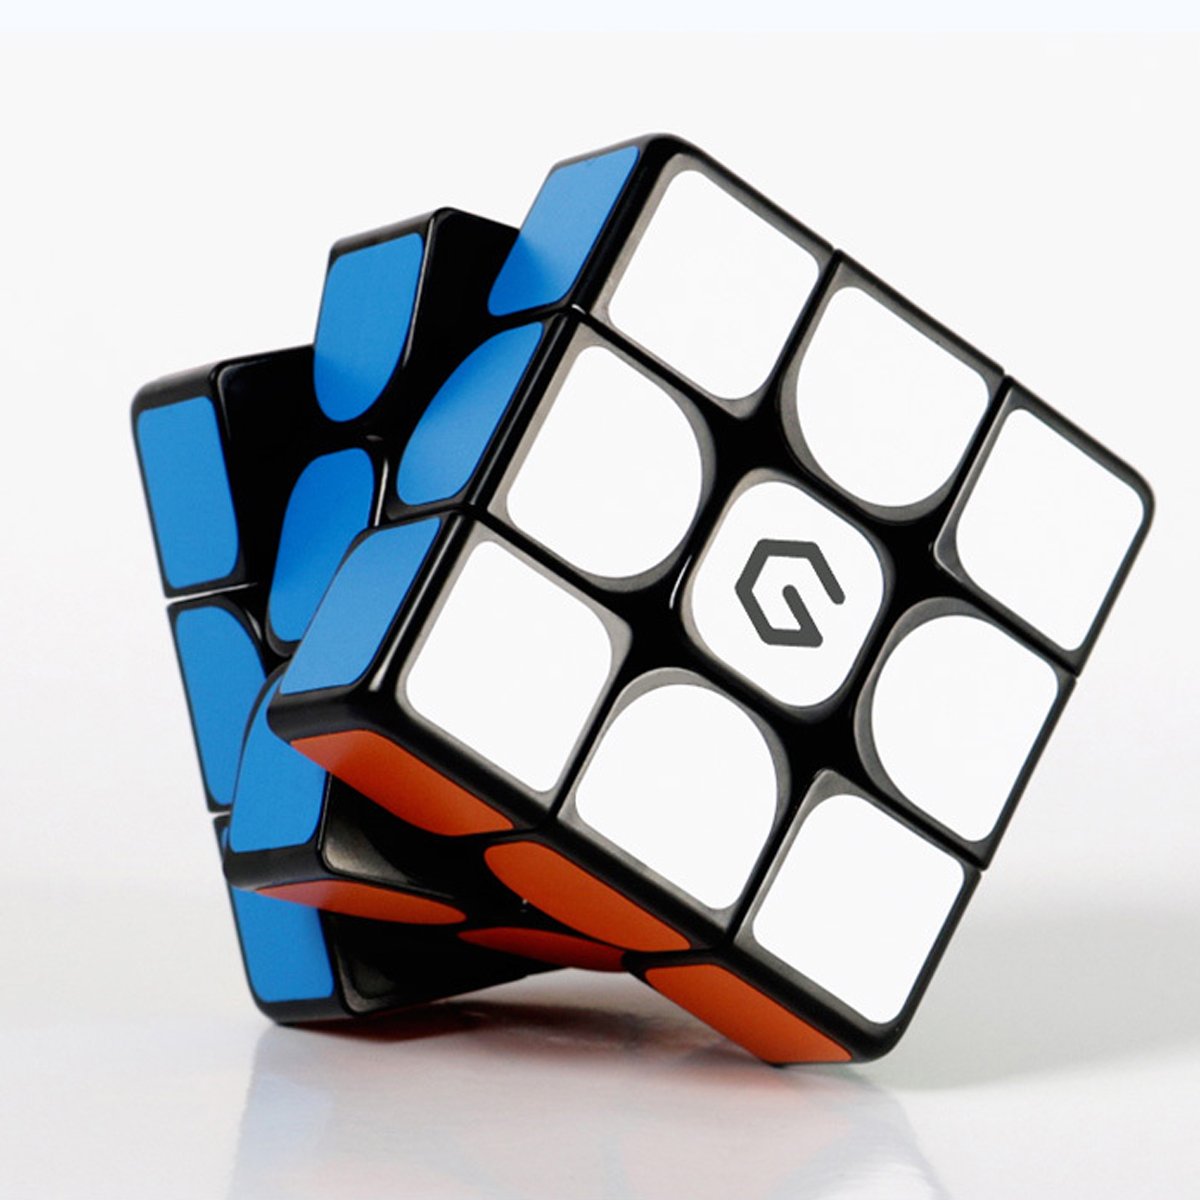 Xiaomi Giiker M3 Magnetic Cube 3x3x3 Vivid Color Square Magic Cube Puzzle Science Education Toy Gift 2